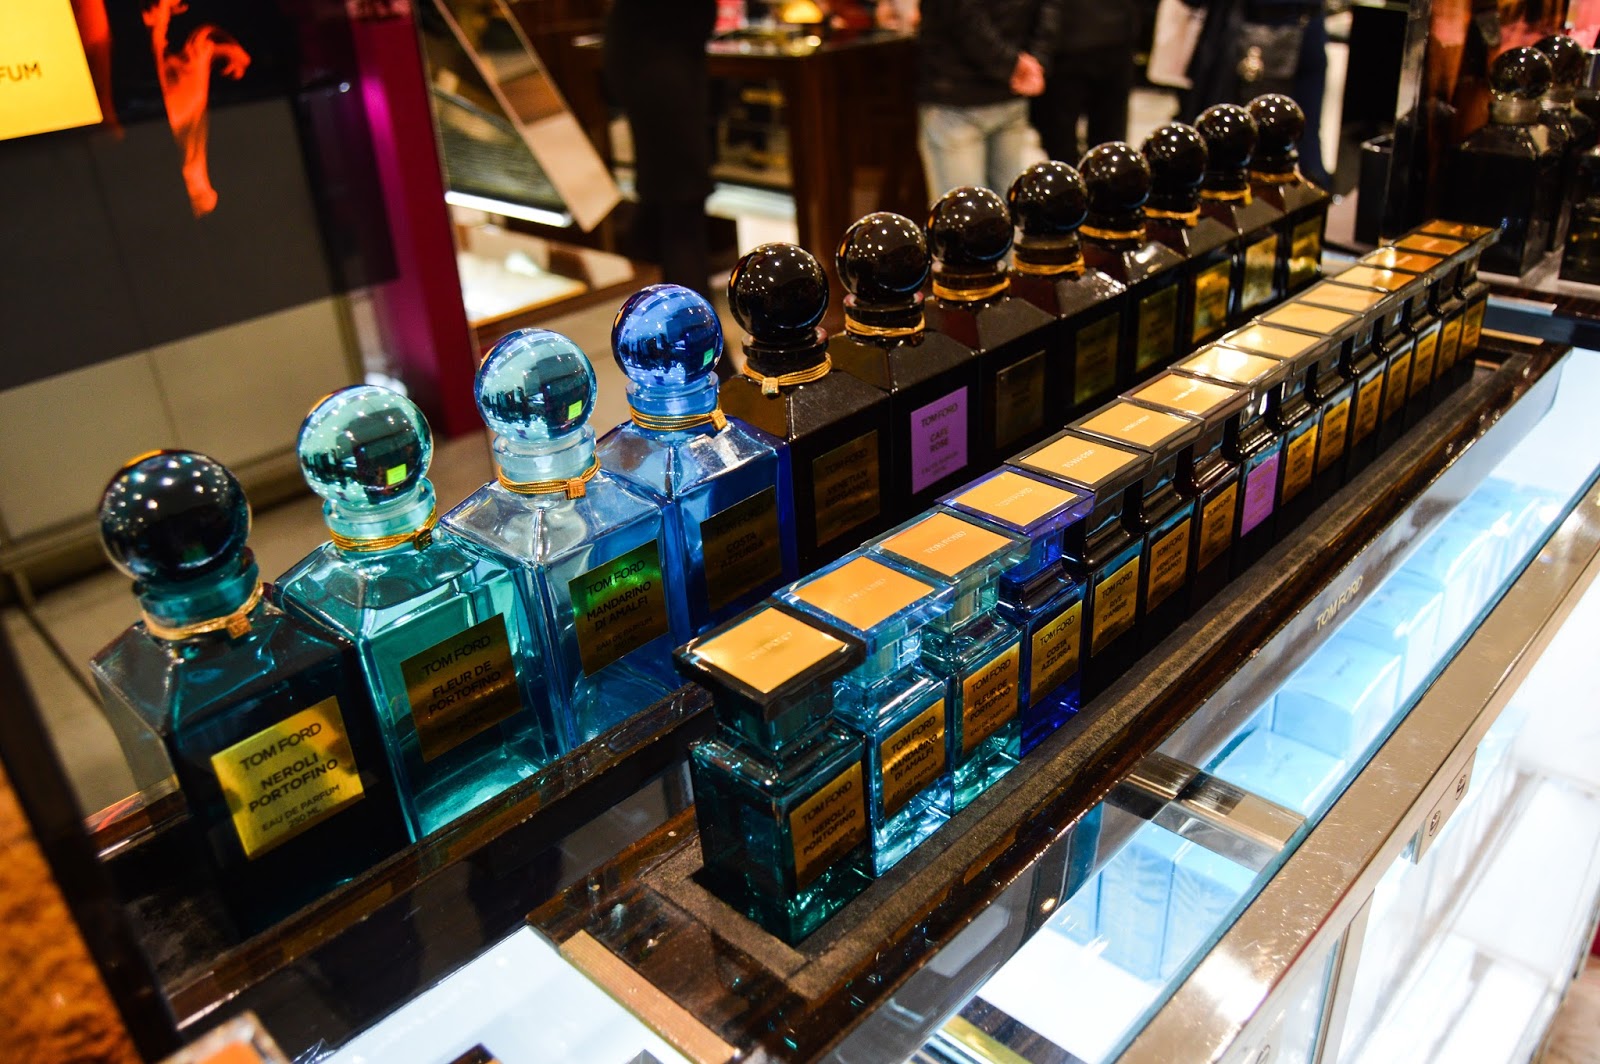 Selfridges Beauty Personal Shopper Experience | Cherries In The Snow